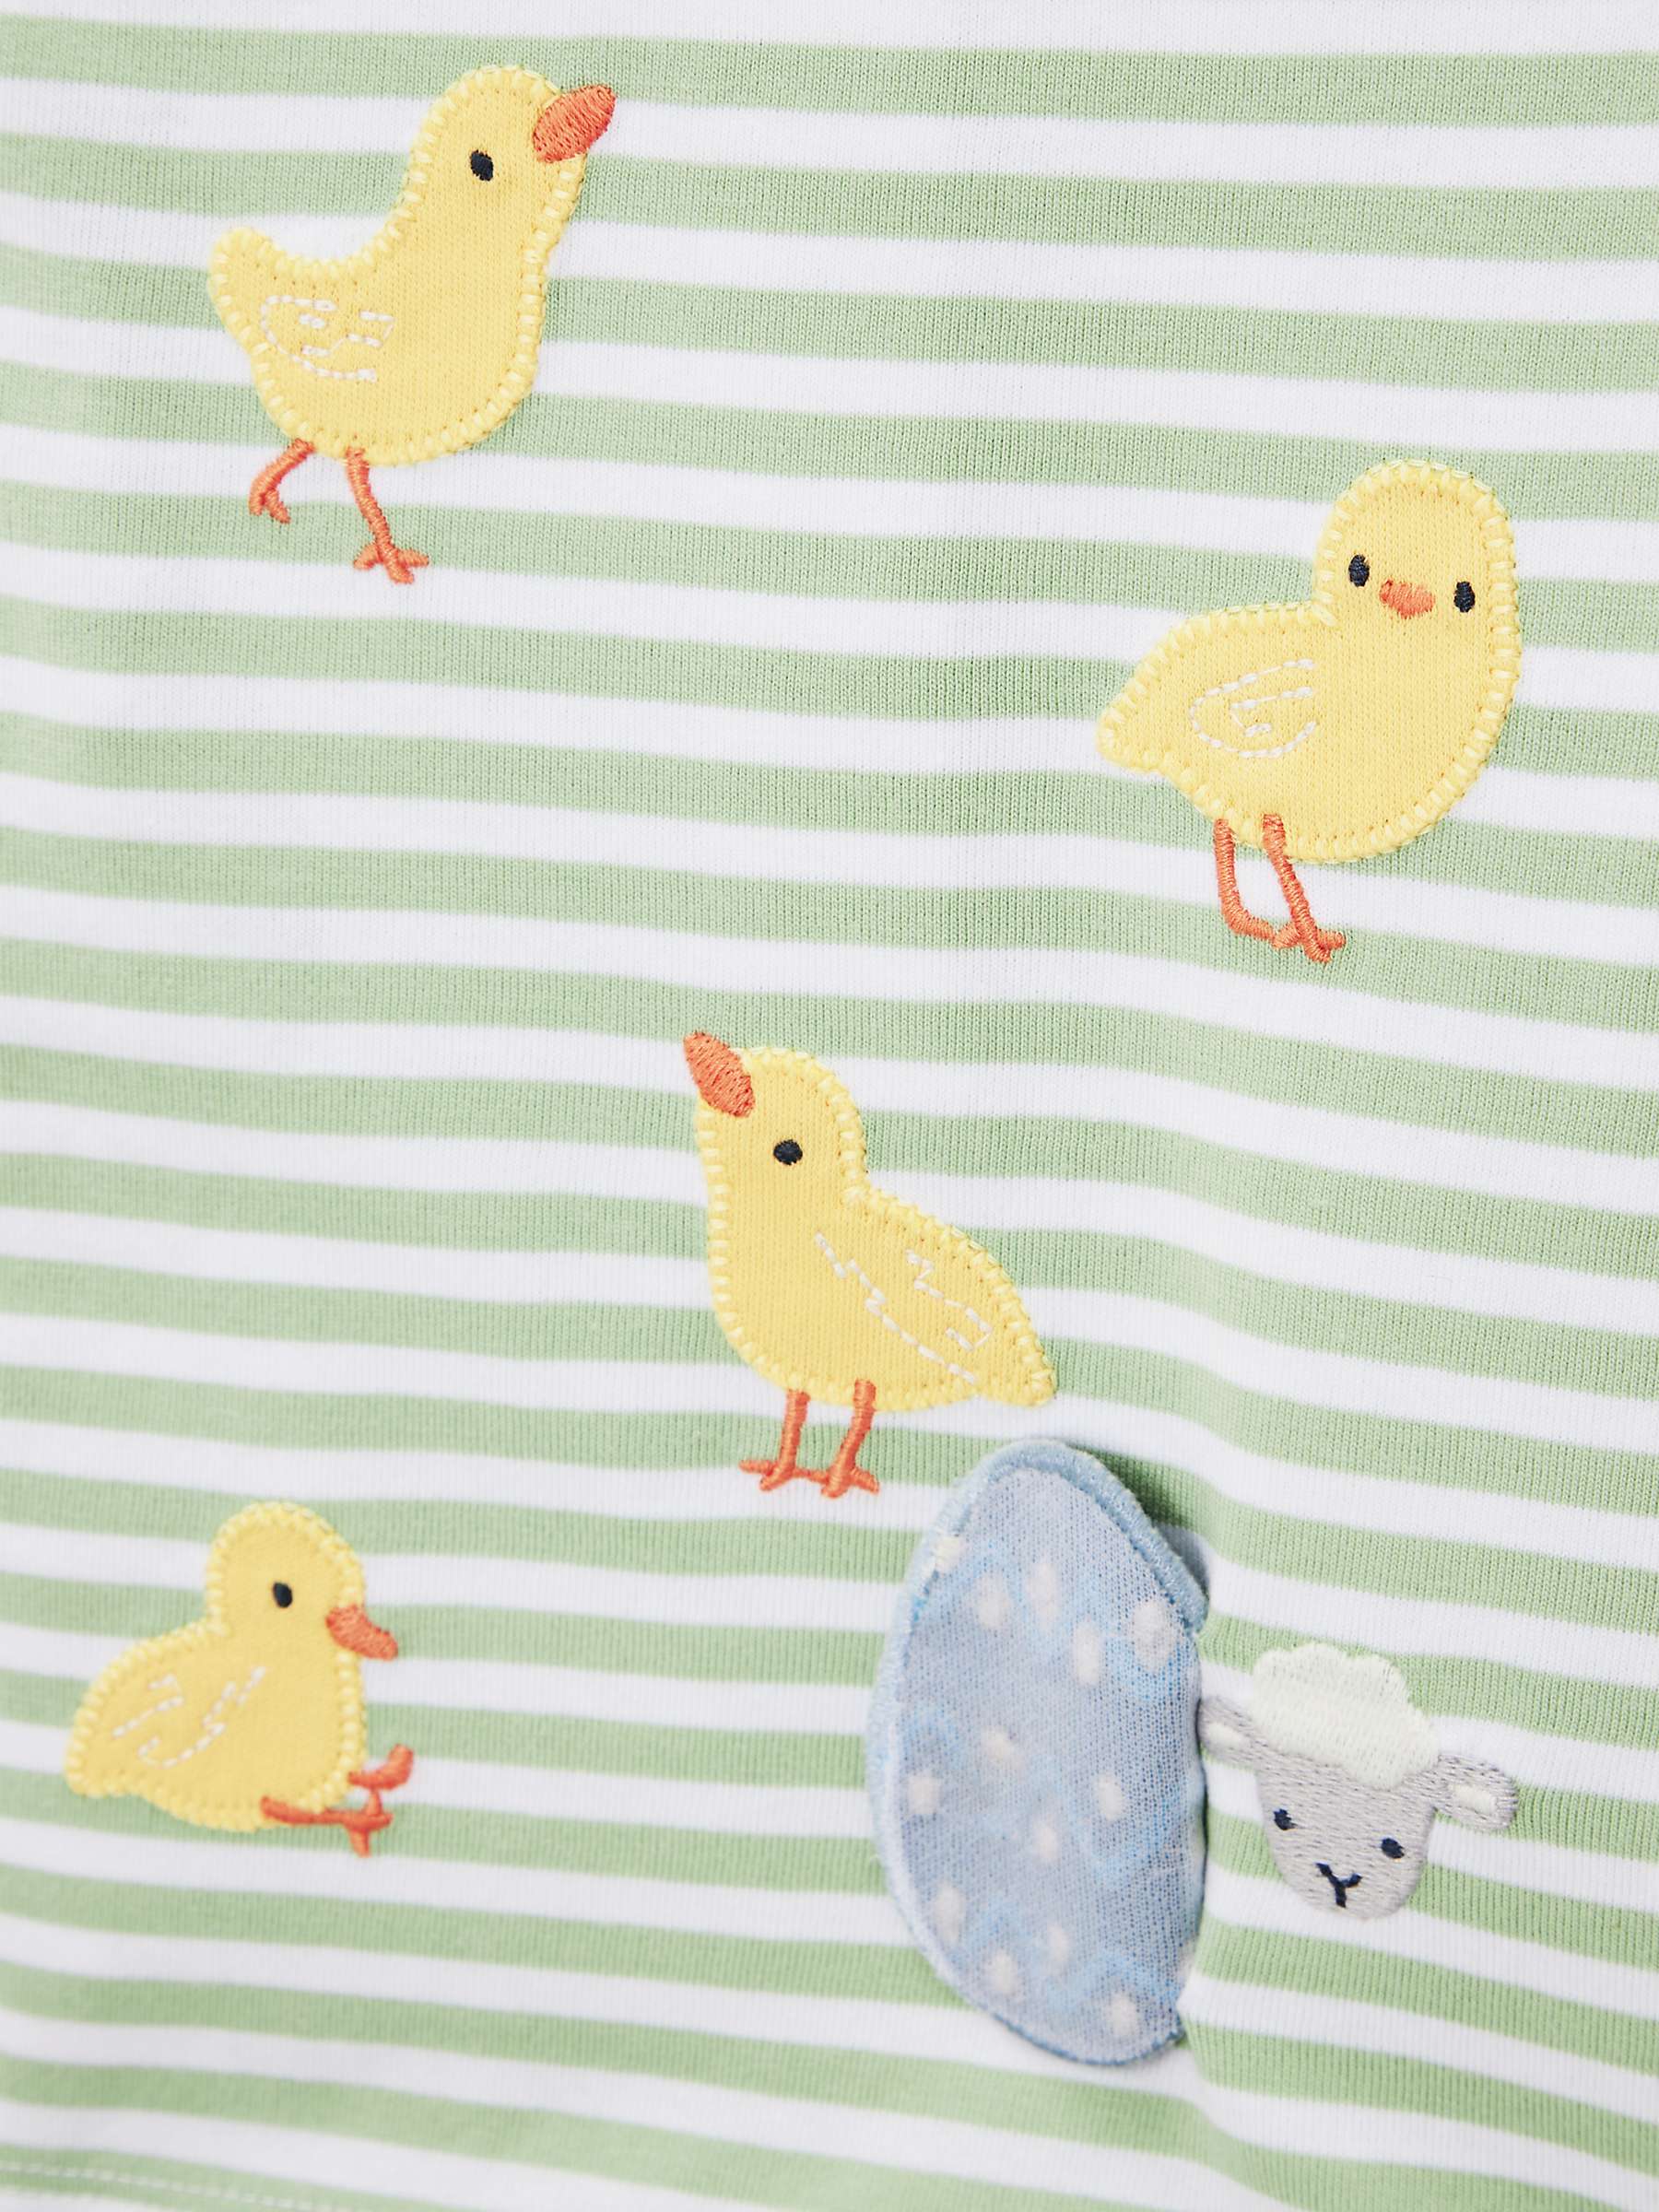 Buy John Lewis Baby Cotton Applique Chick Long Sleeve Top, Multi Online at johnlewis.com